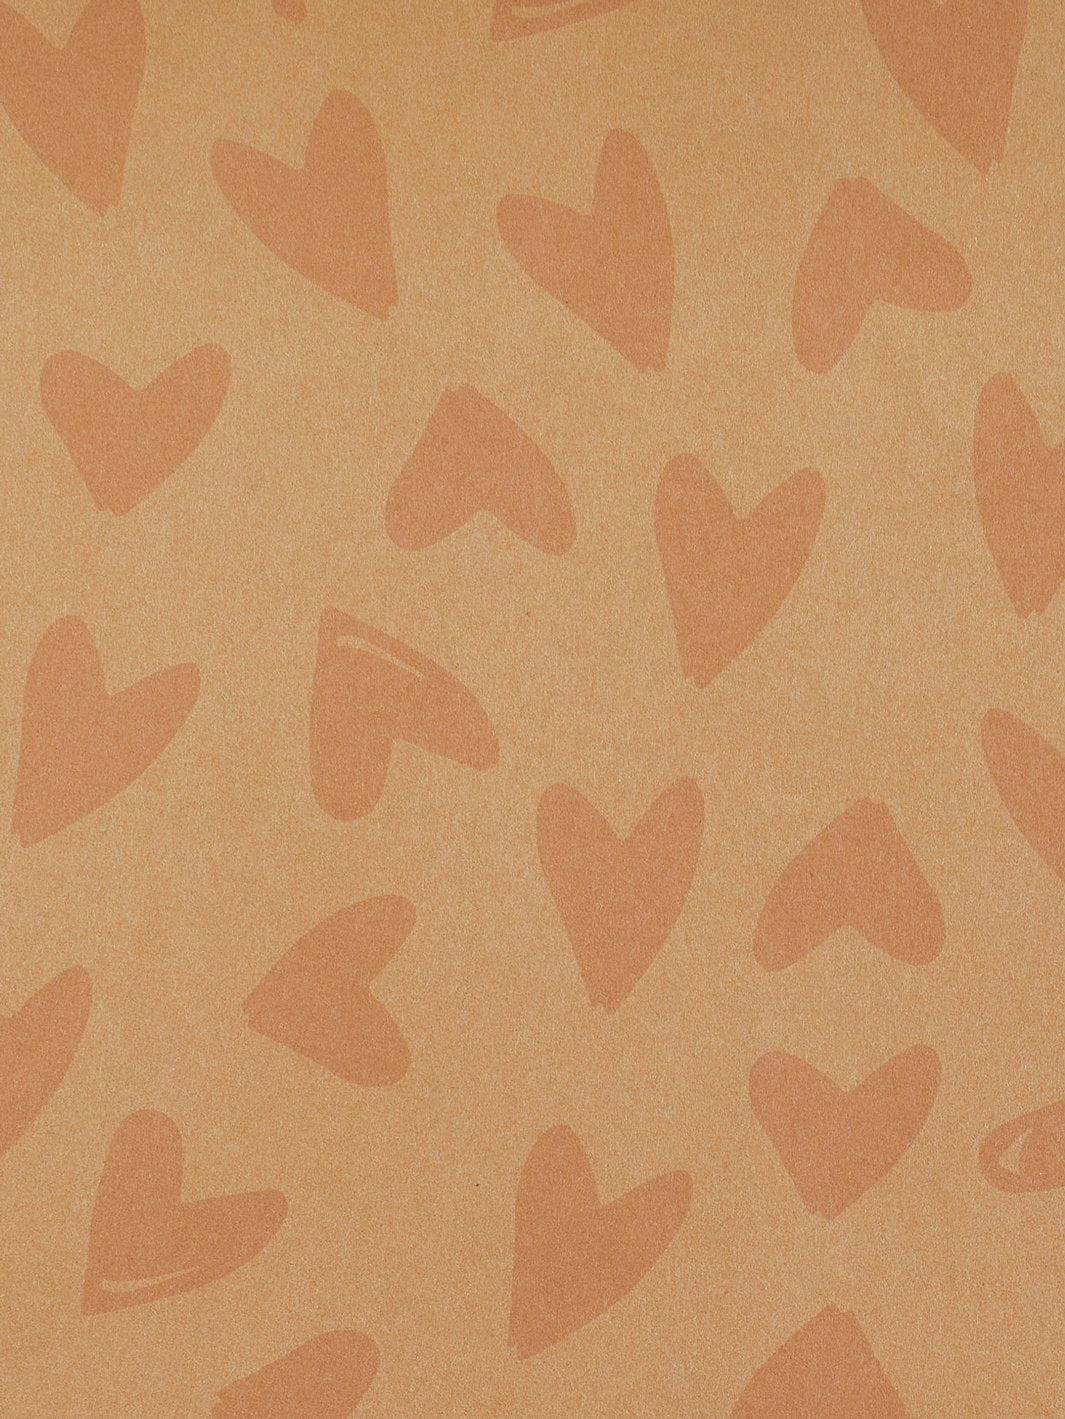 'Scattered Hearts' Kraft' Wallpaper by Sugar Paper - Pink